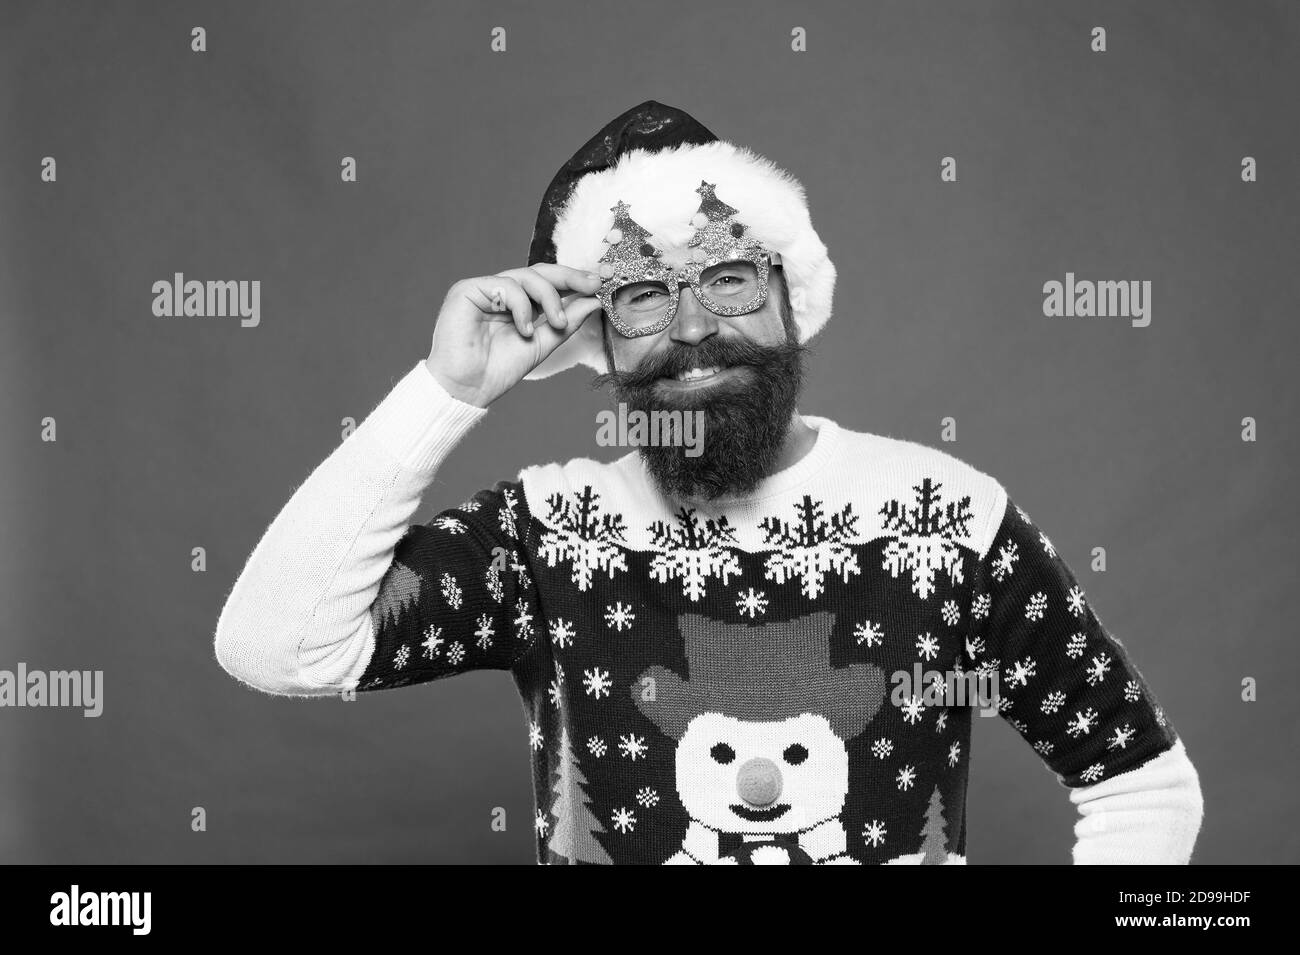 Every Santa needs a pair of these accessories. Happy santa wear fancy glasses. Bearded man with xmas tree party accessories. Festive costume accessories. Holiday accessories. Christmas and new year. Stock Photo